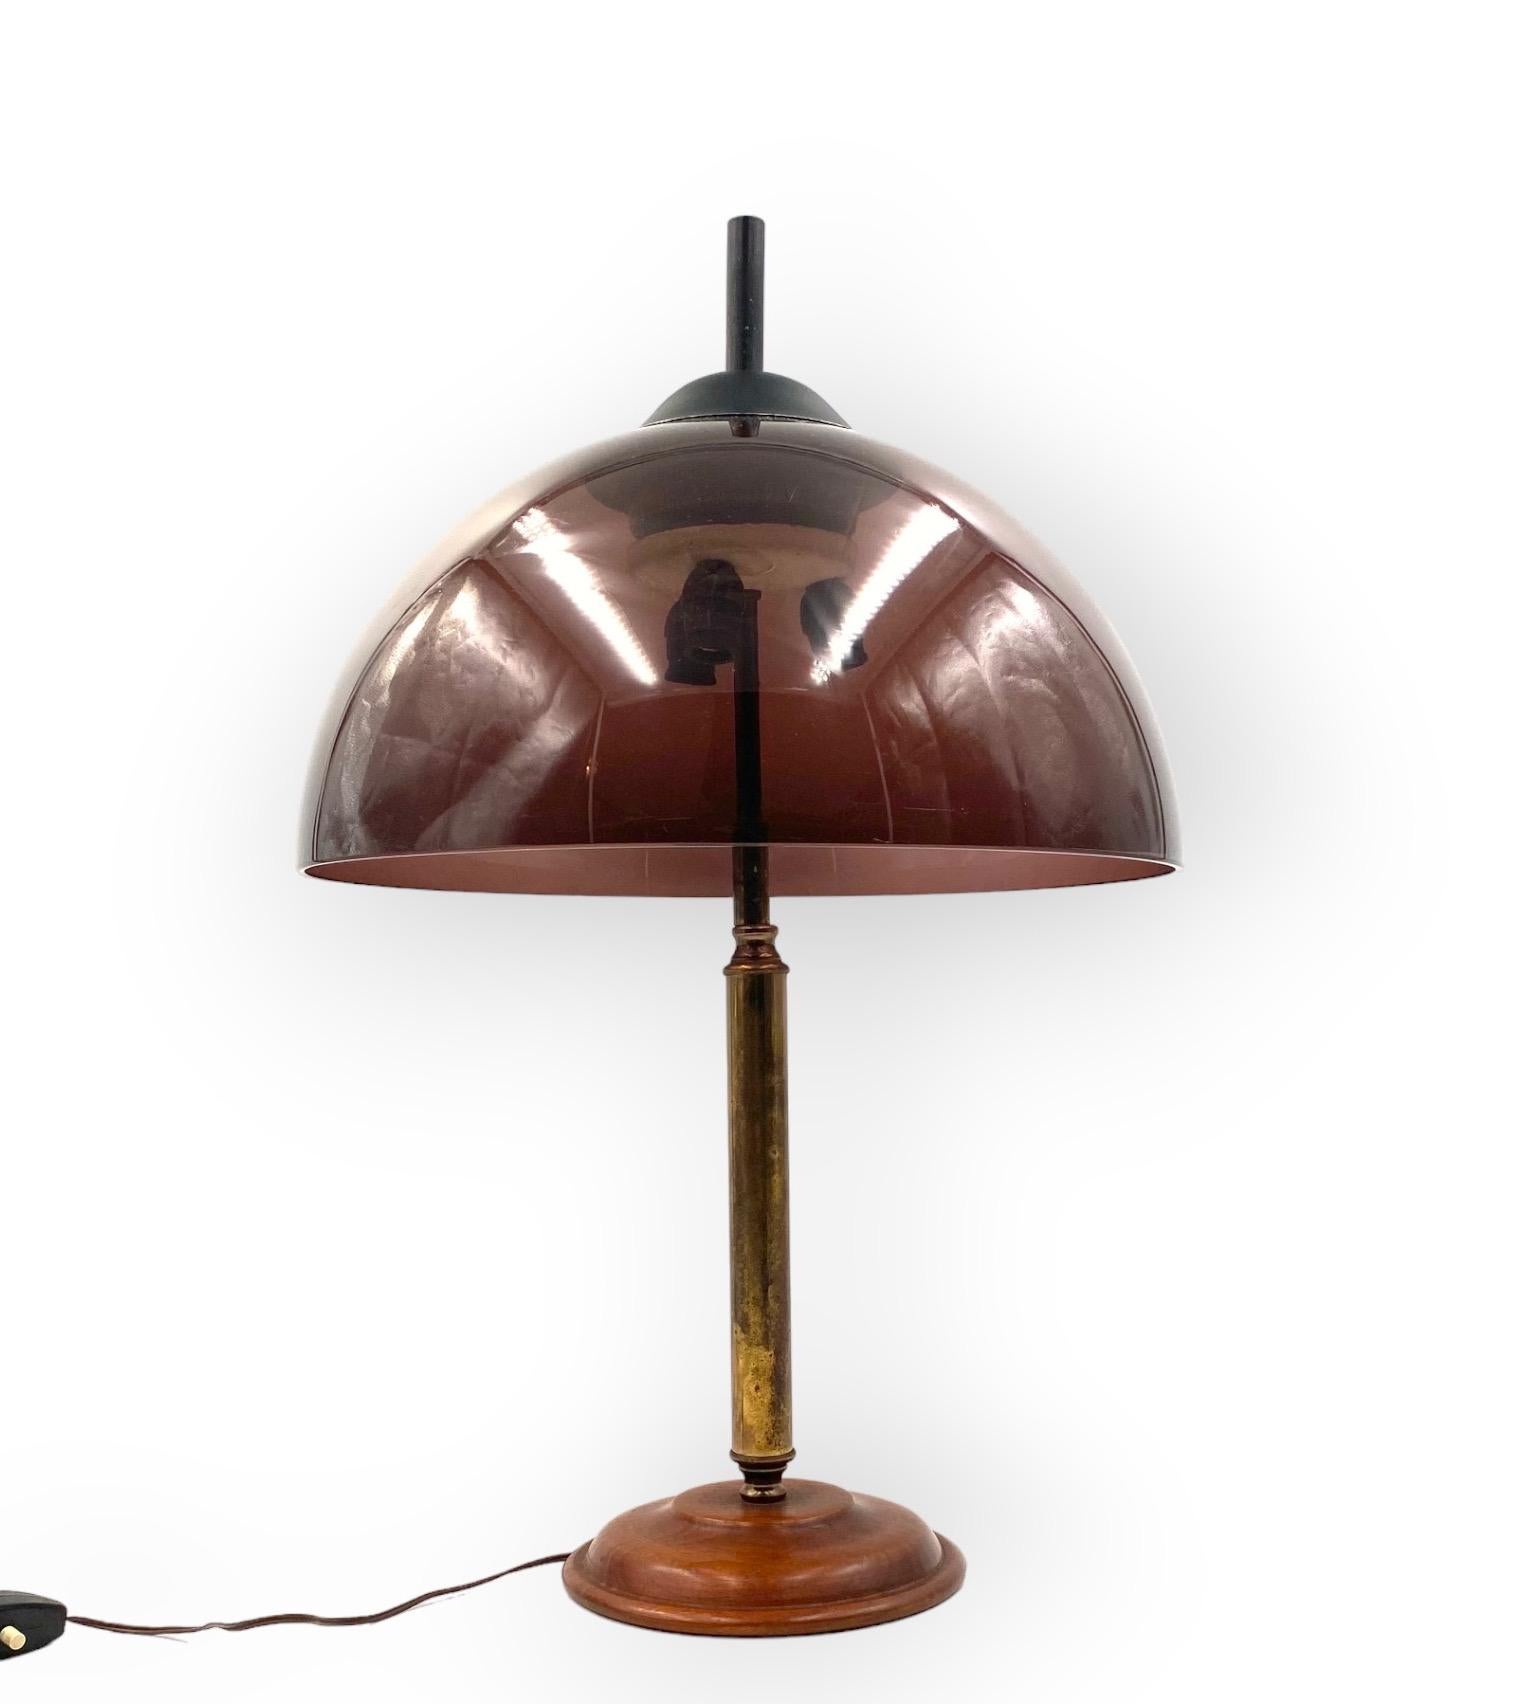 Mid-century table lamp, grey perspex domed shade.

Stilux, Milan Italy, 1950s

Wooden base, brass rod, acrylic

H 56 cm 

Diam. 34cm

Conditions: good consistent with age and use, signs of wear on the shade. 